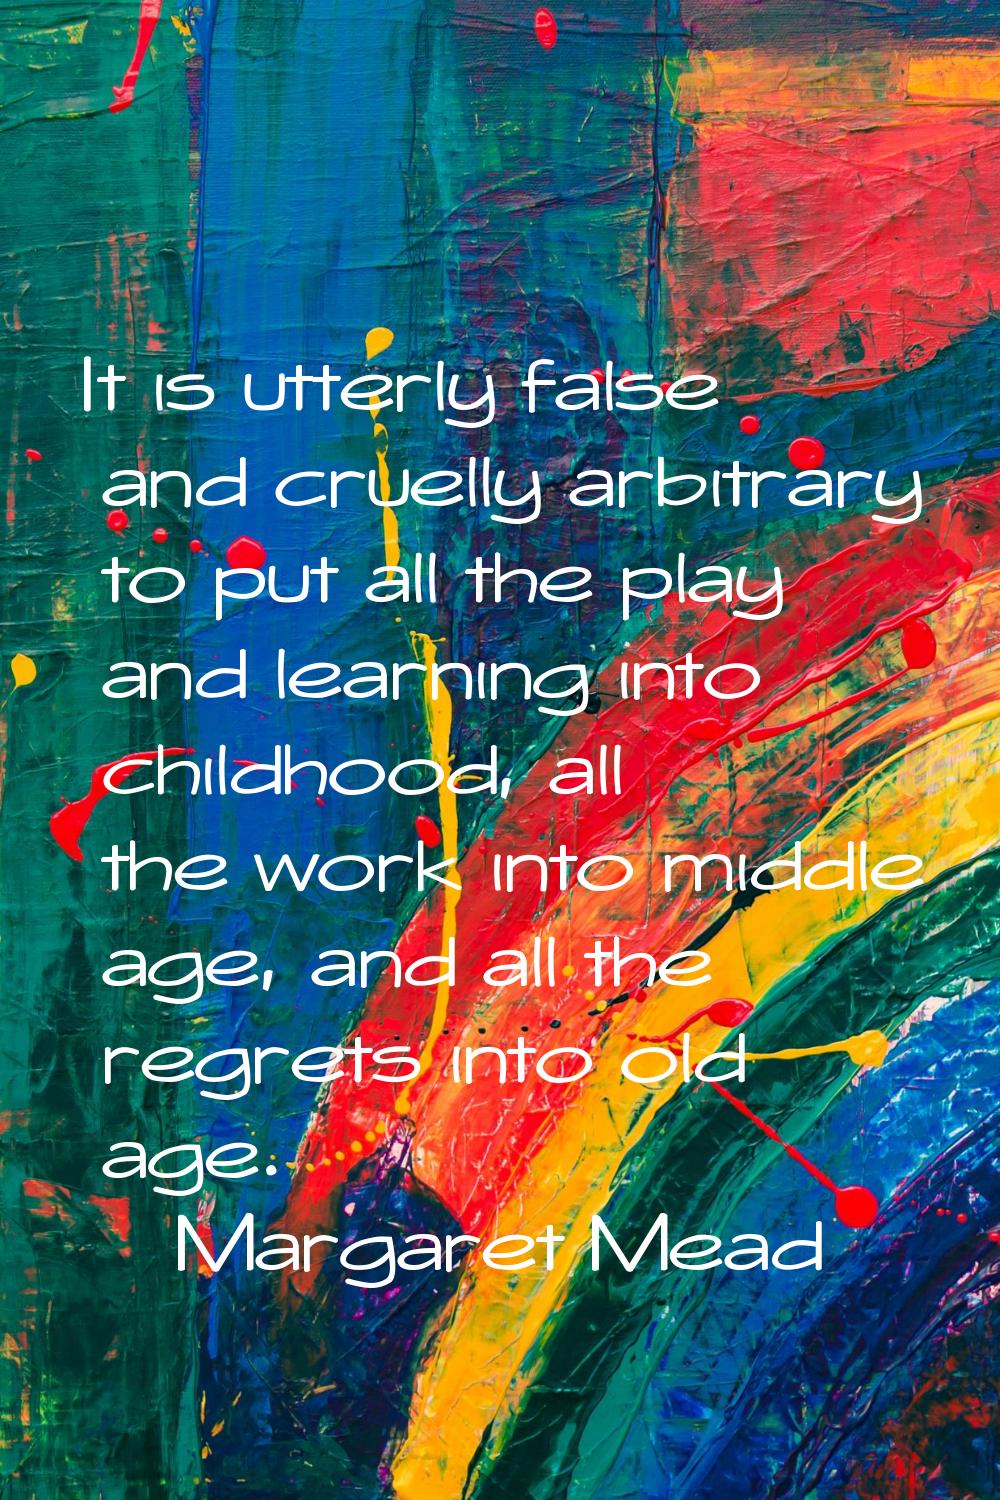 It is utterly false and cruelly arbitrary to put all the play and learning into childhood, all the 